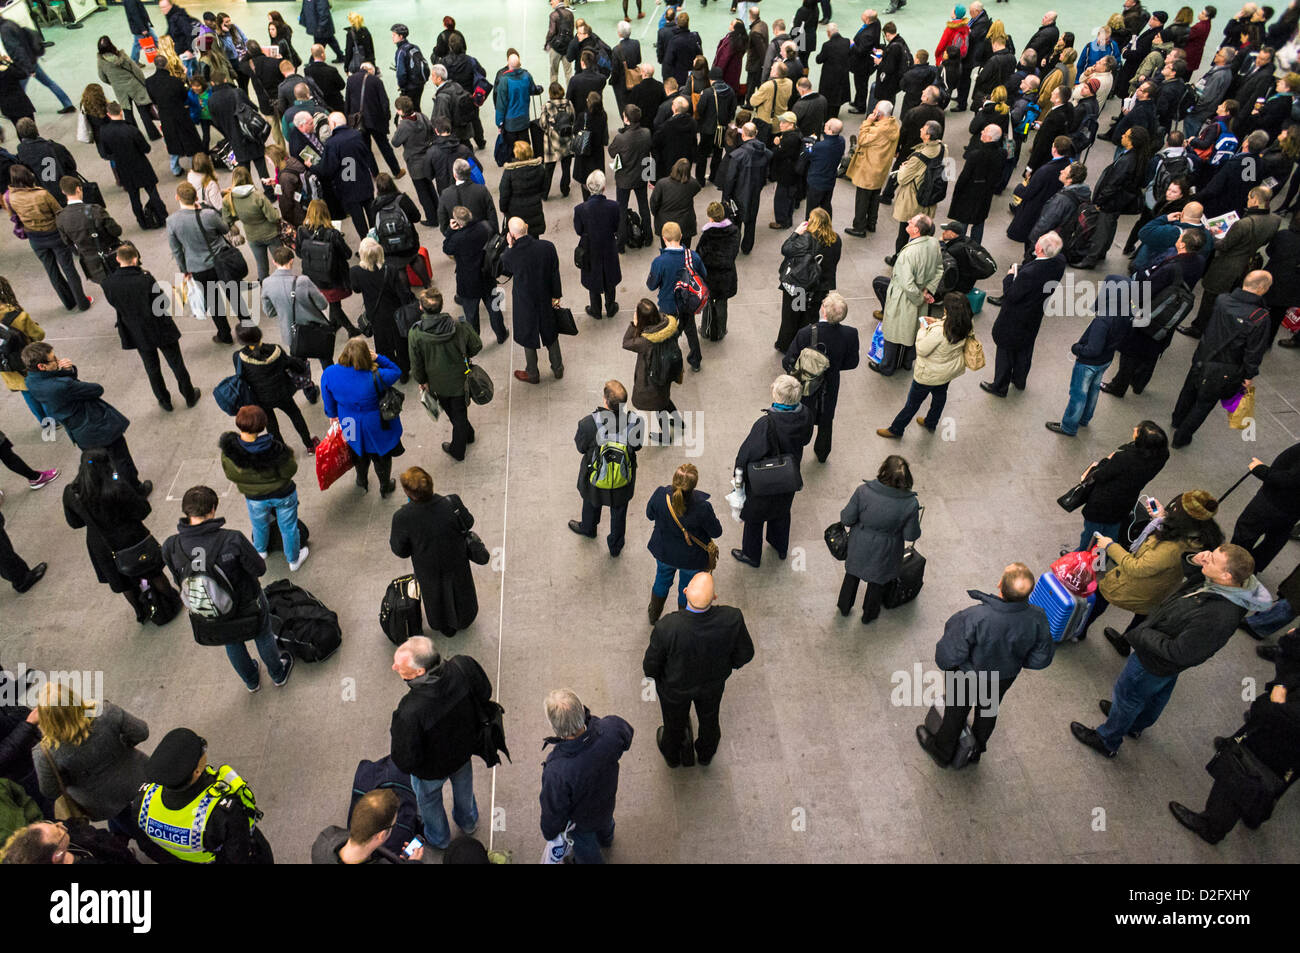 Commuters - People waiting for trains at Kings Cross station, London, UK - from above Stock Photo